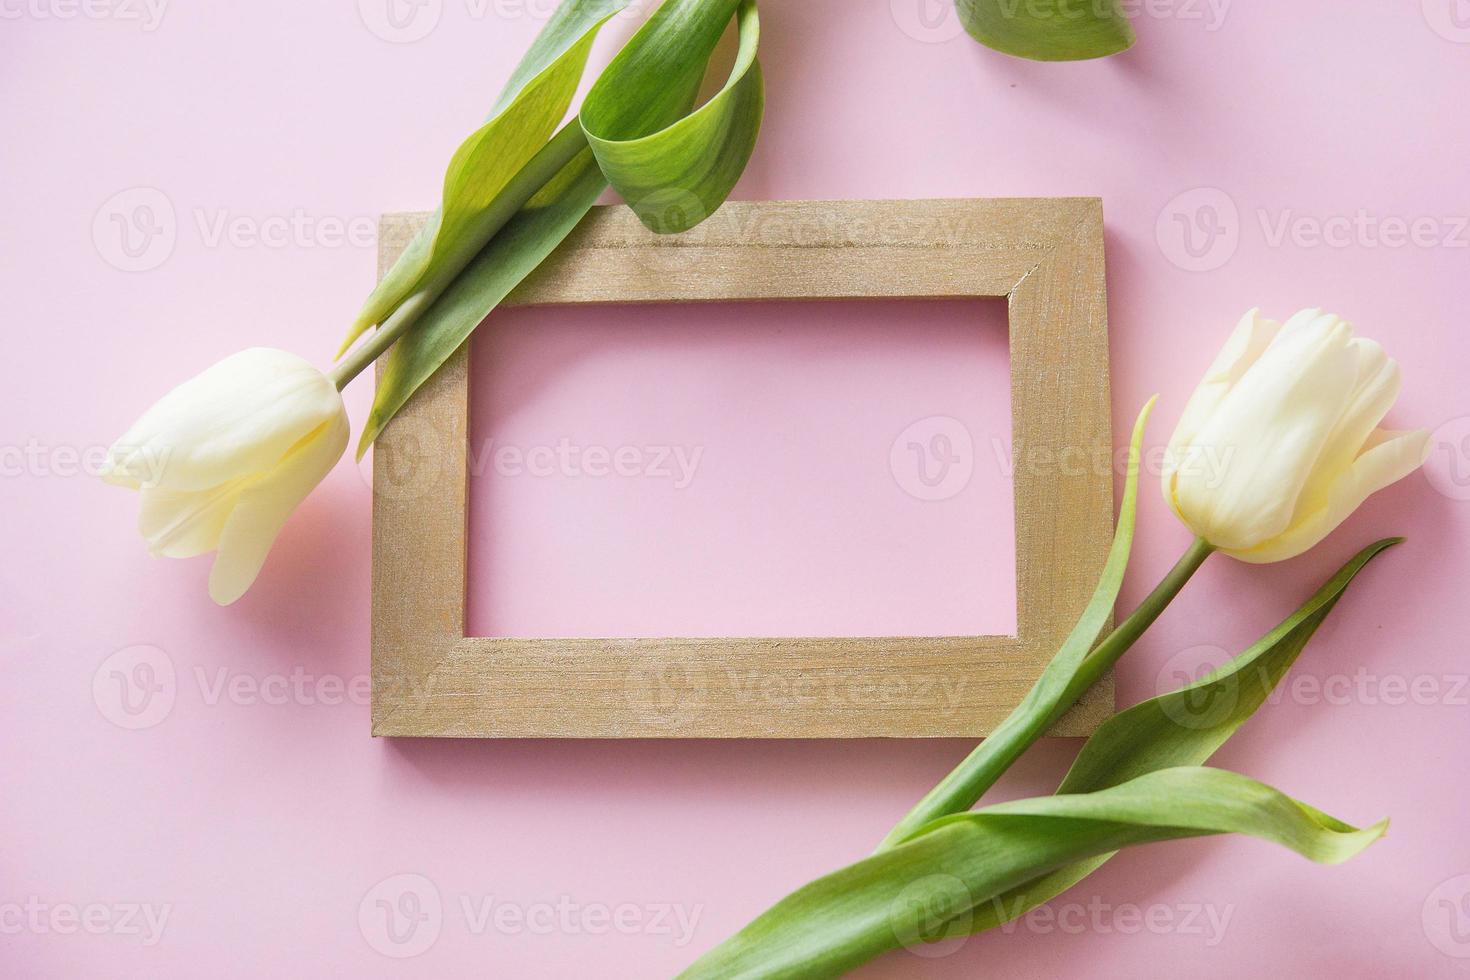 Yellow Tulip flowers are arranged on a pink background. Flowers on a close-up photo frame. Spring concept. Women's day.